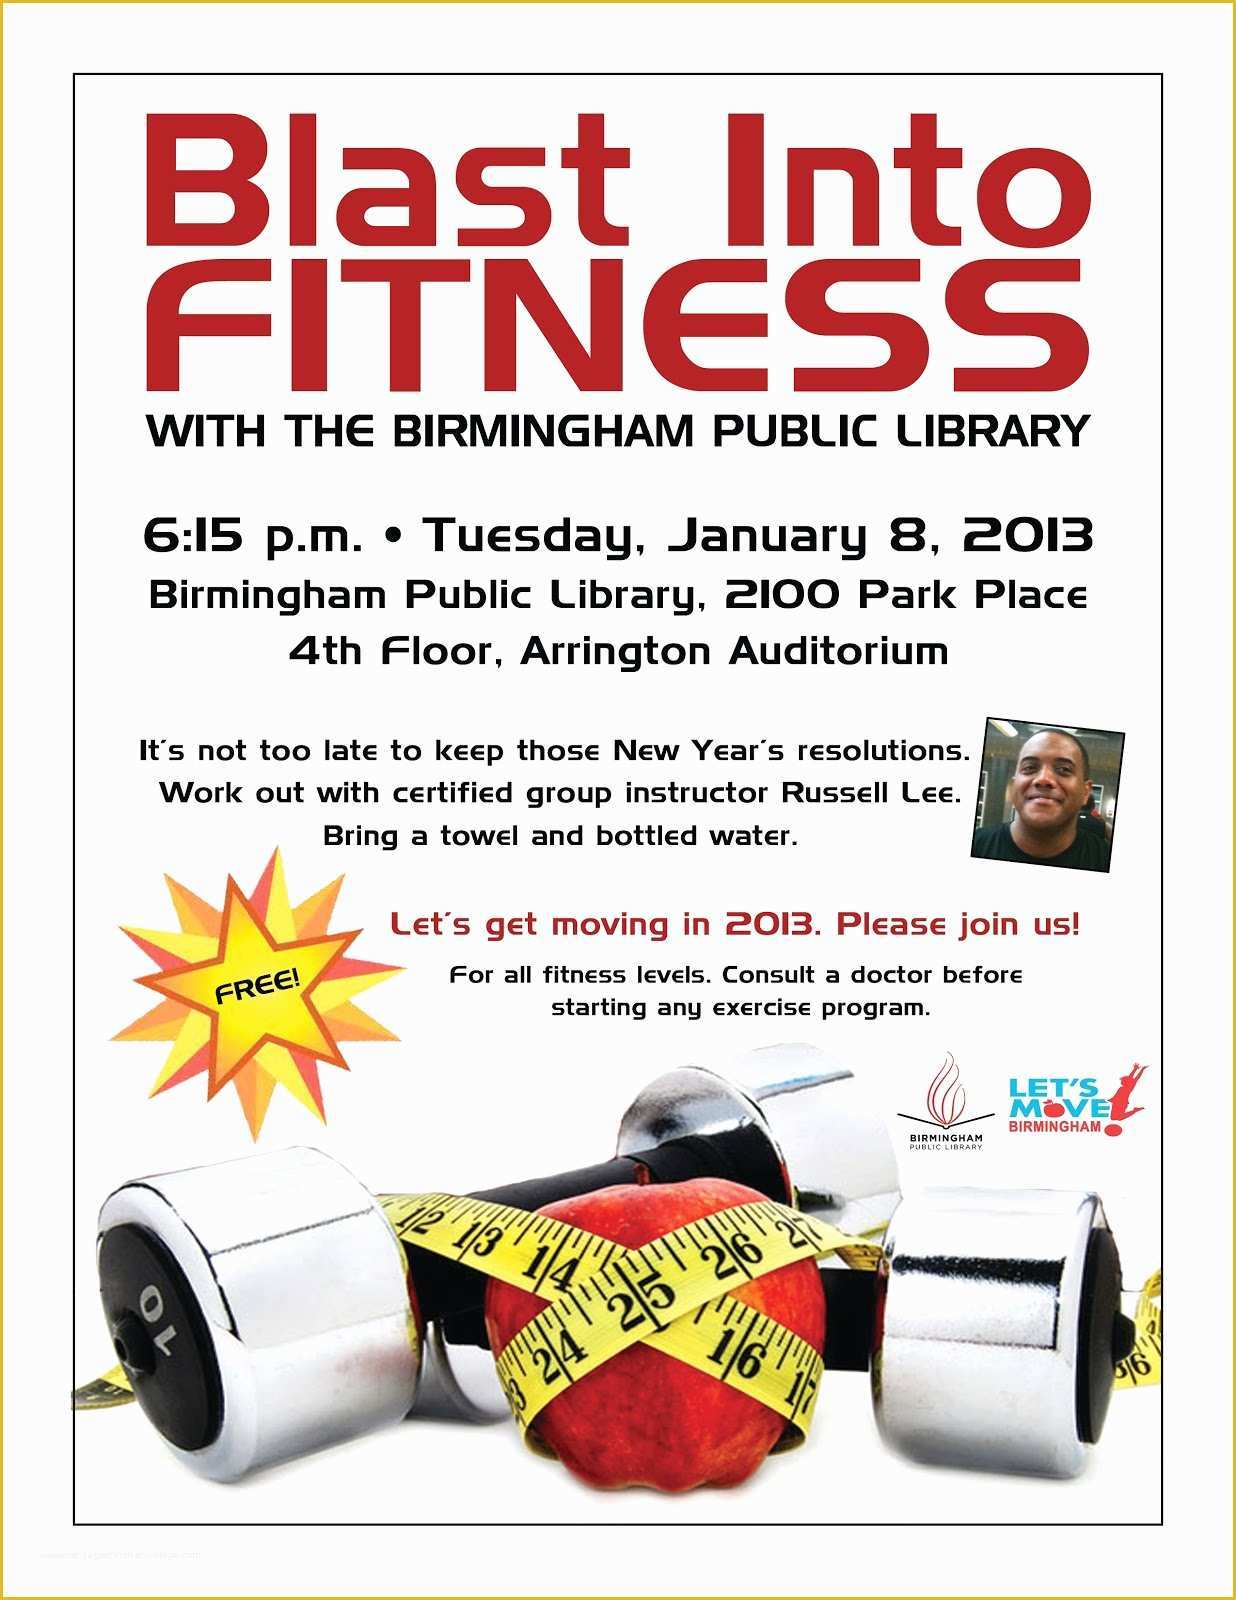 Free Fitness Flyer Template Publisher Of Birmingham Public Library Blast Into Fitness with A Free